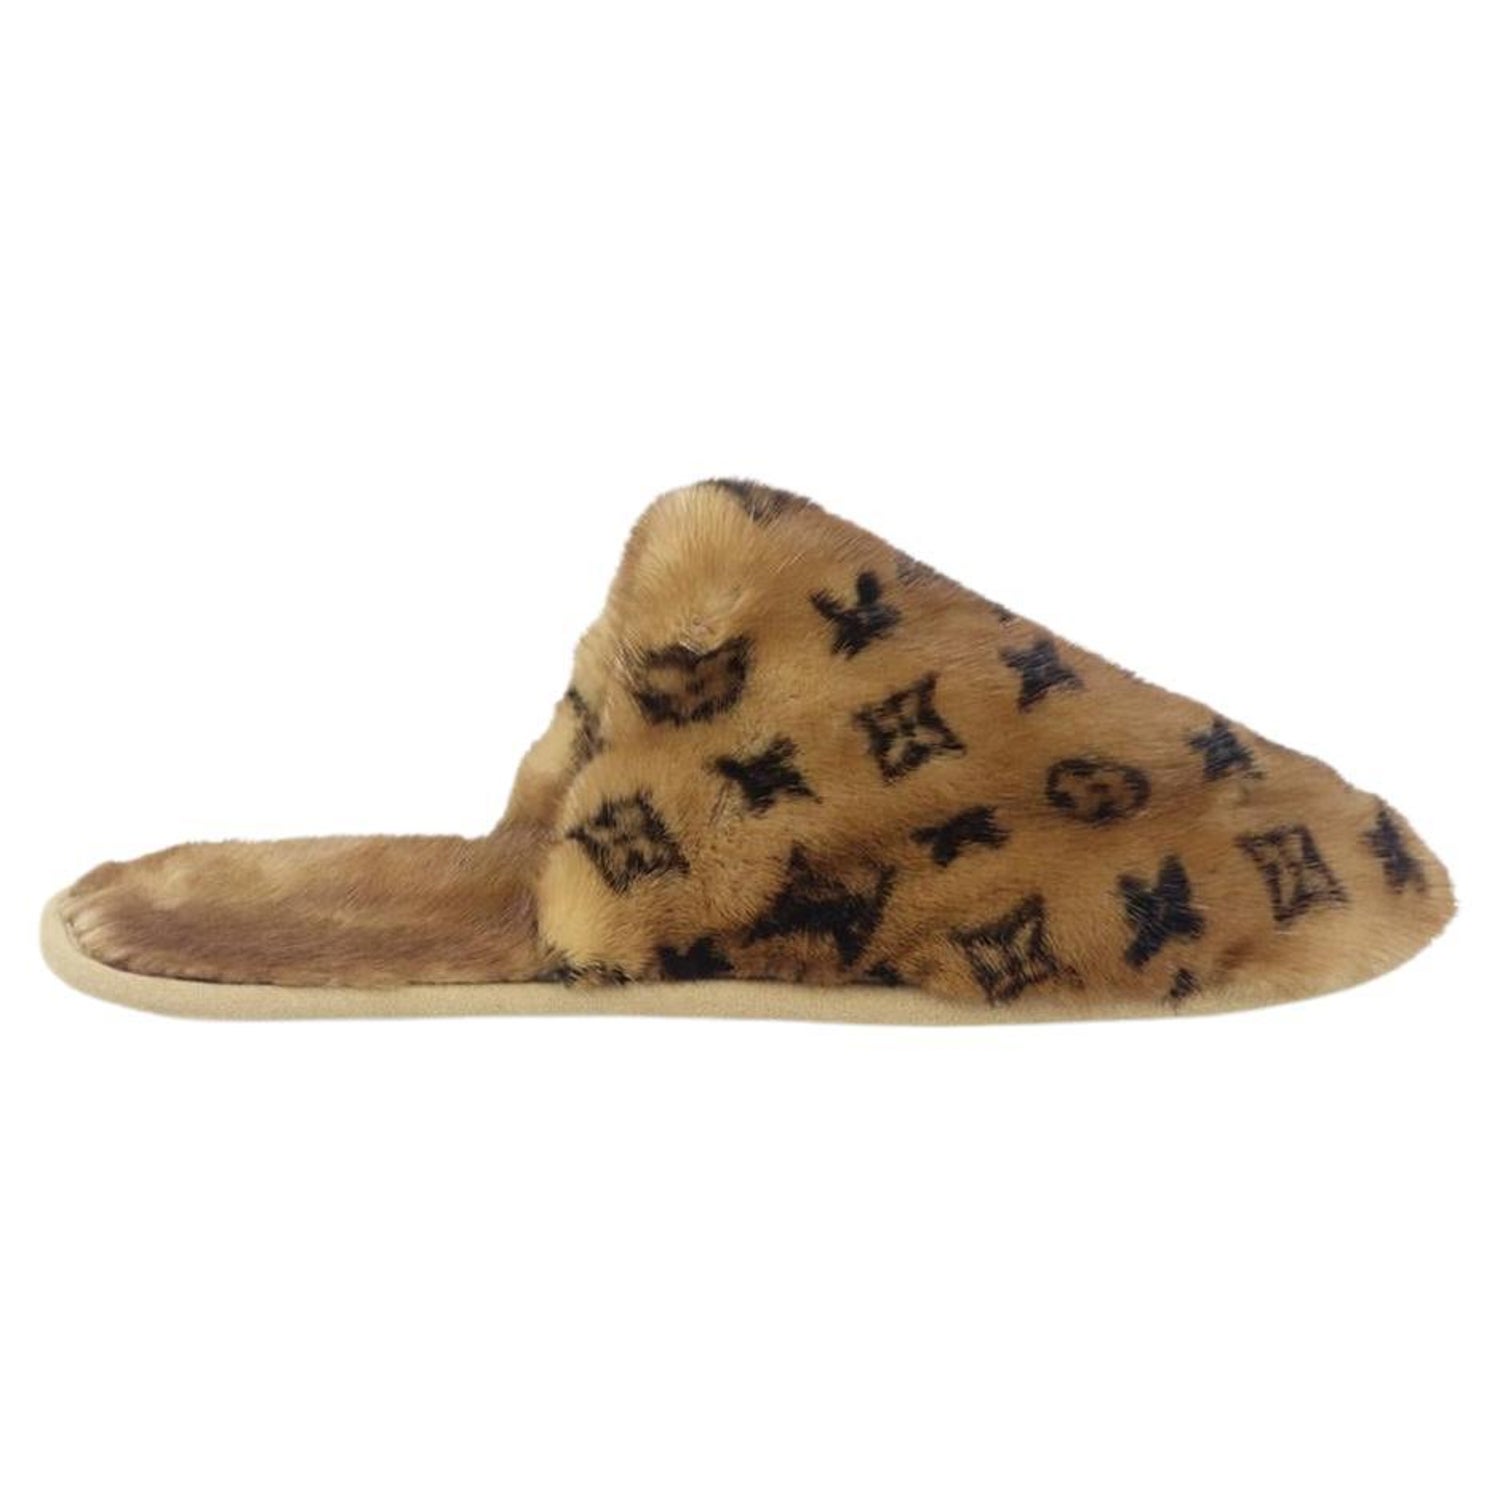 louis vuitton mink mule slippers - OFF-53% >Free Delivery